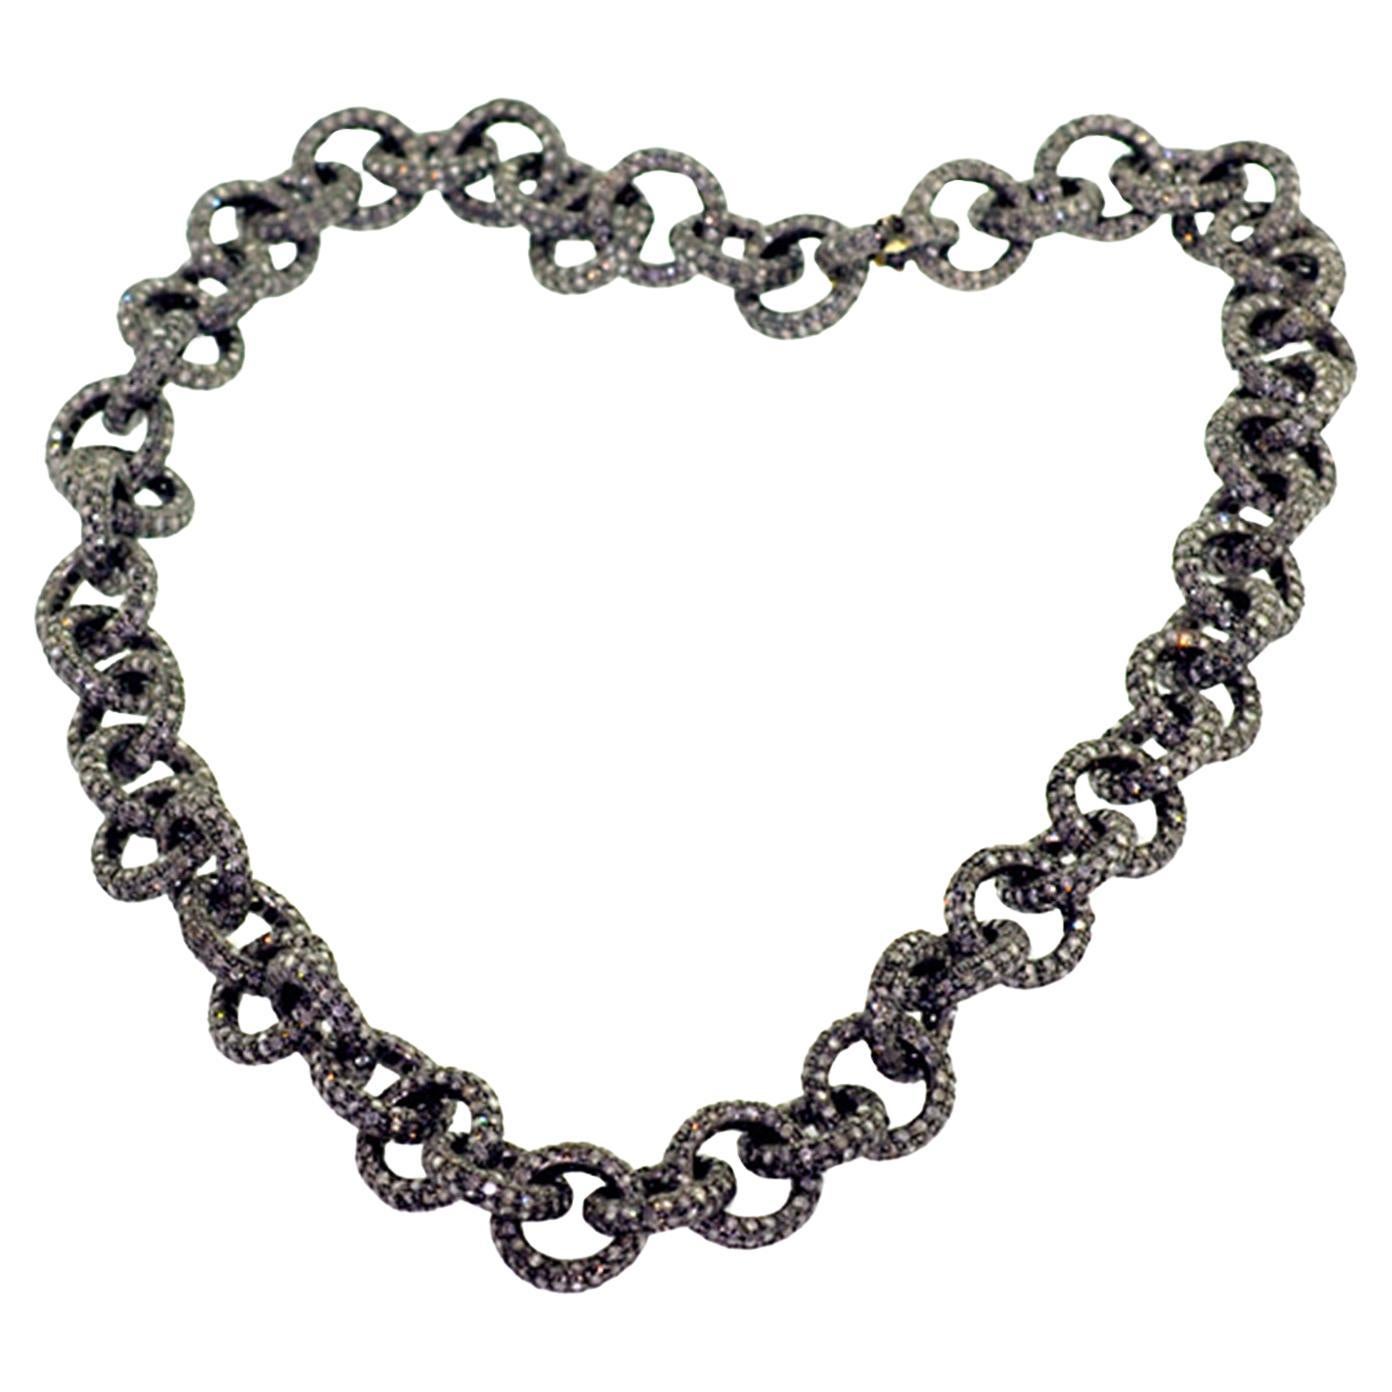 Round Pave Diamond Link Necklace Made In 14k White Gold